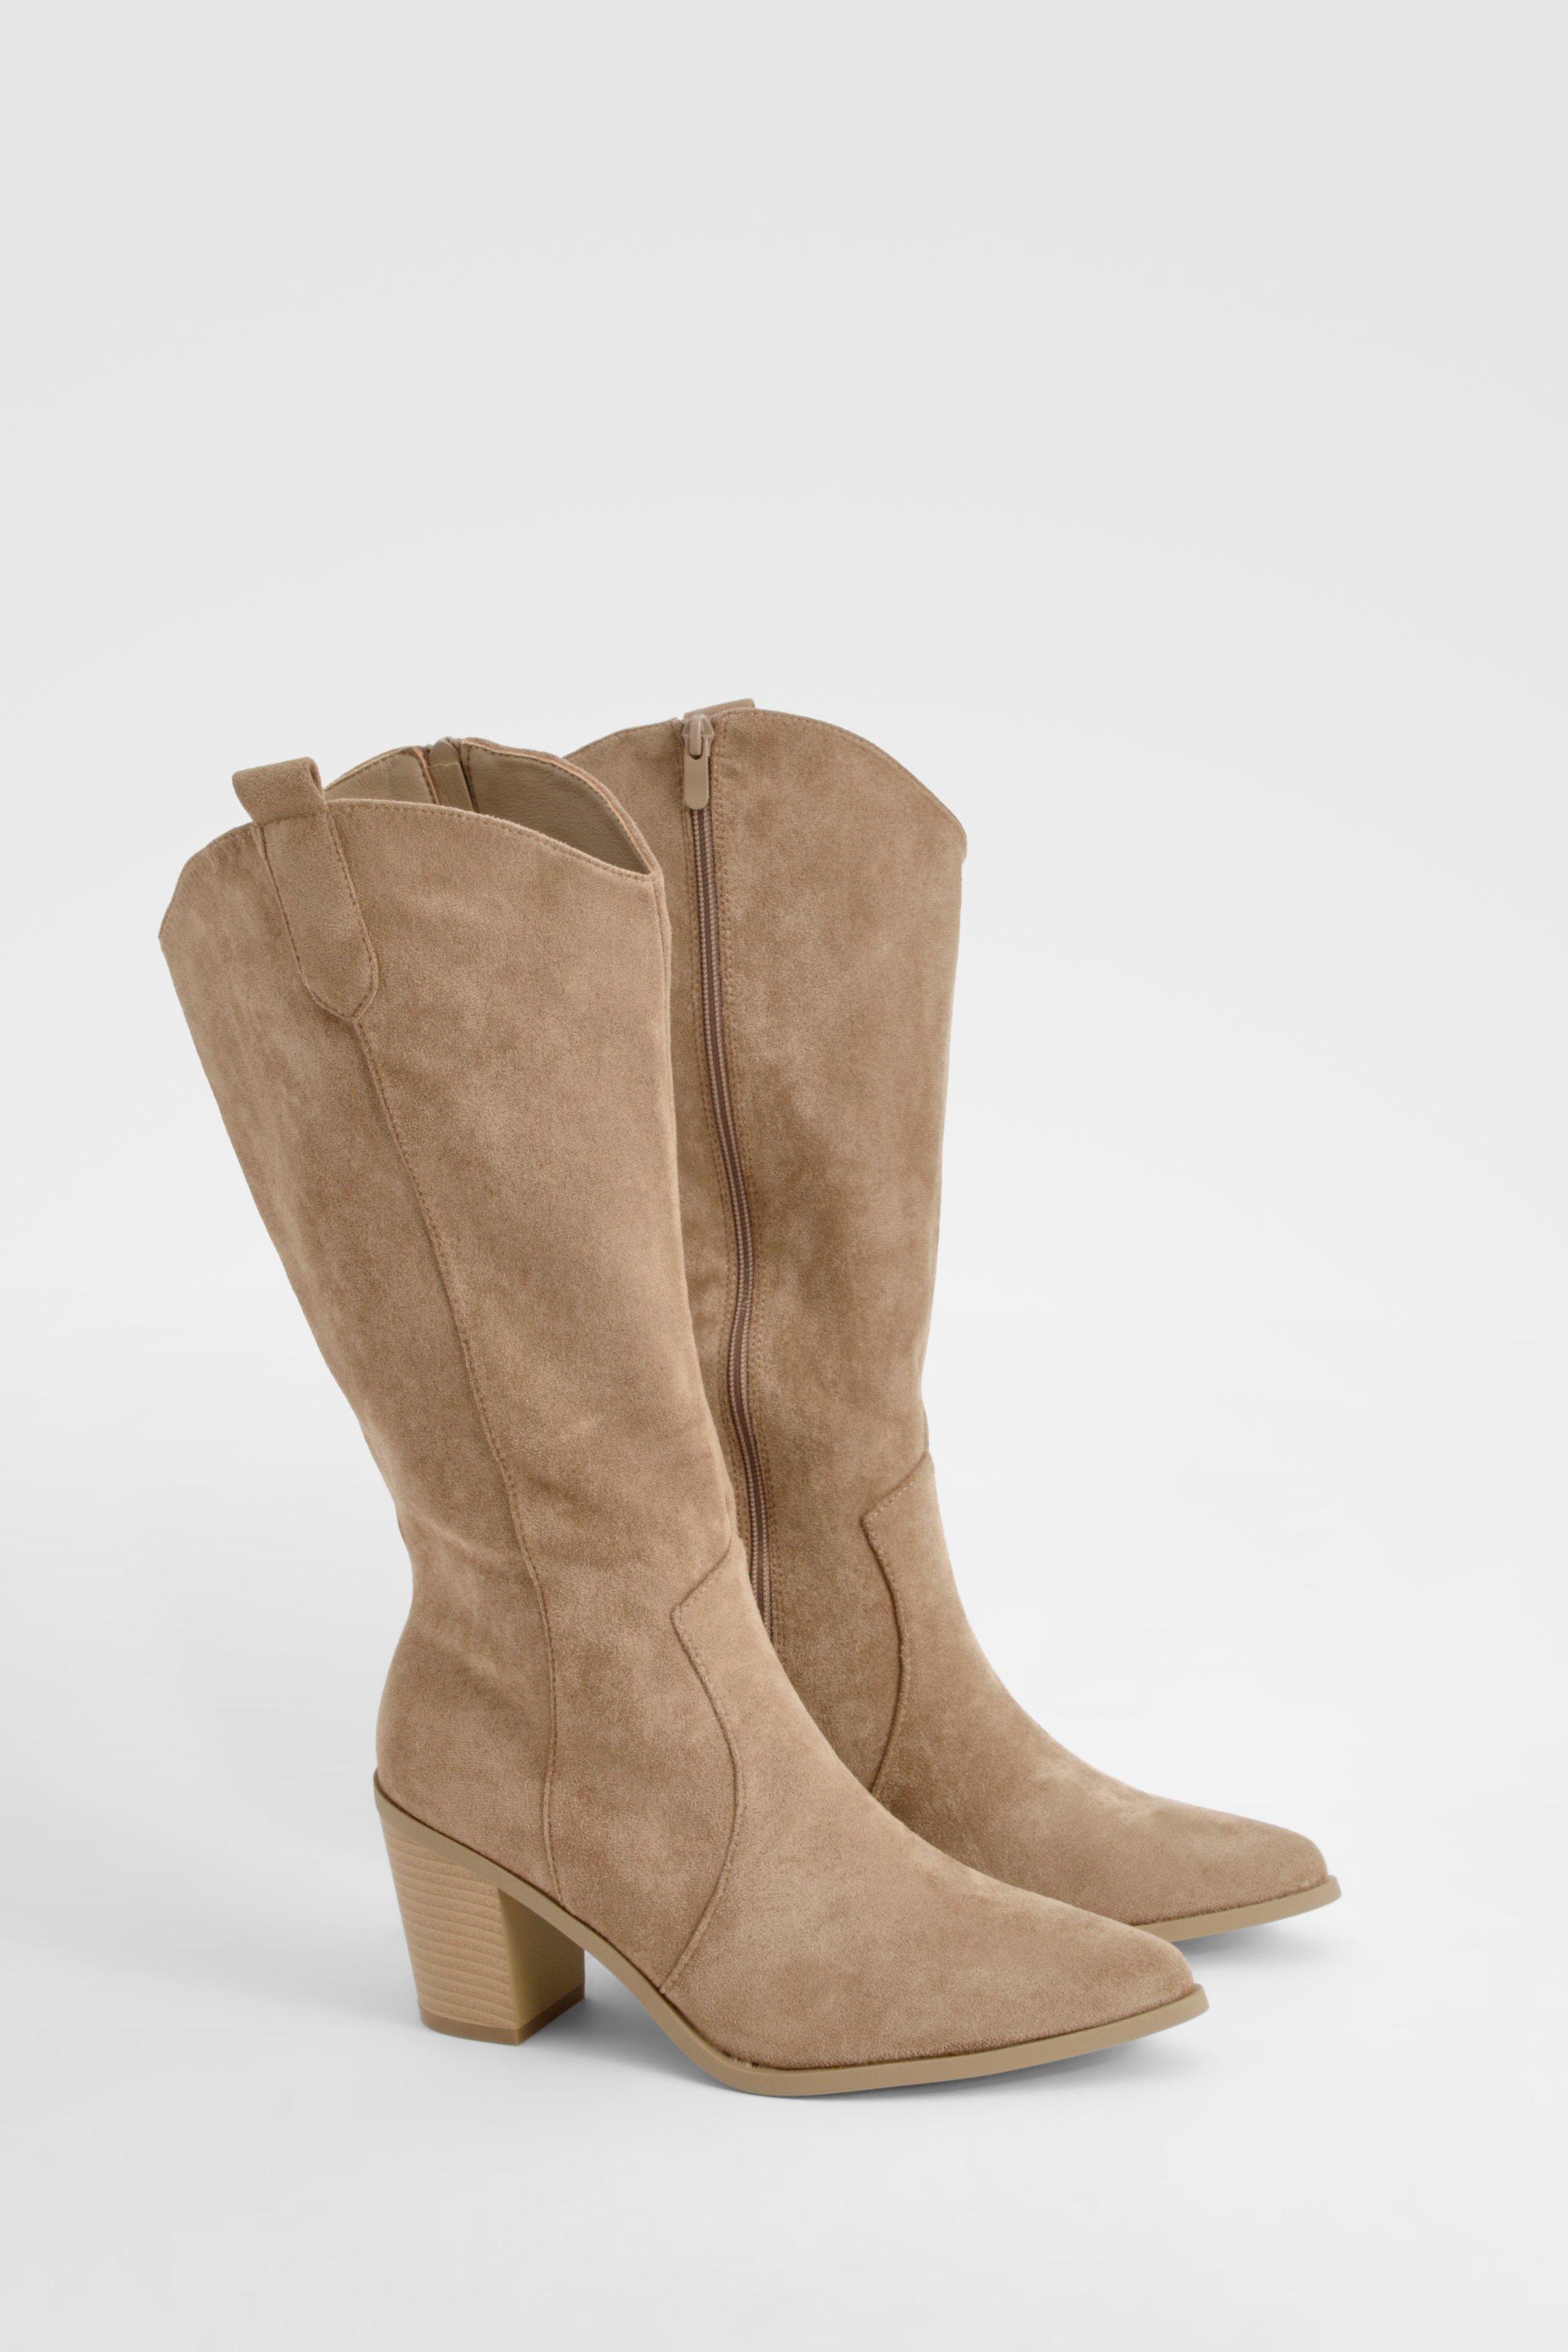 Boohoo Western Style Pointed Toe Knee High Heeled Boot, Taupe